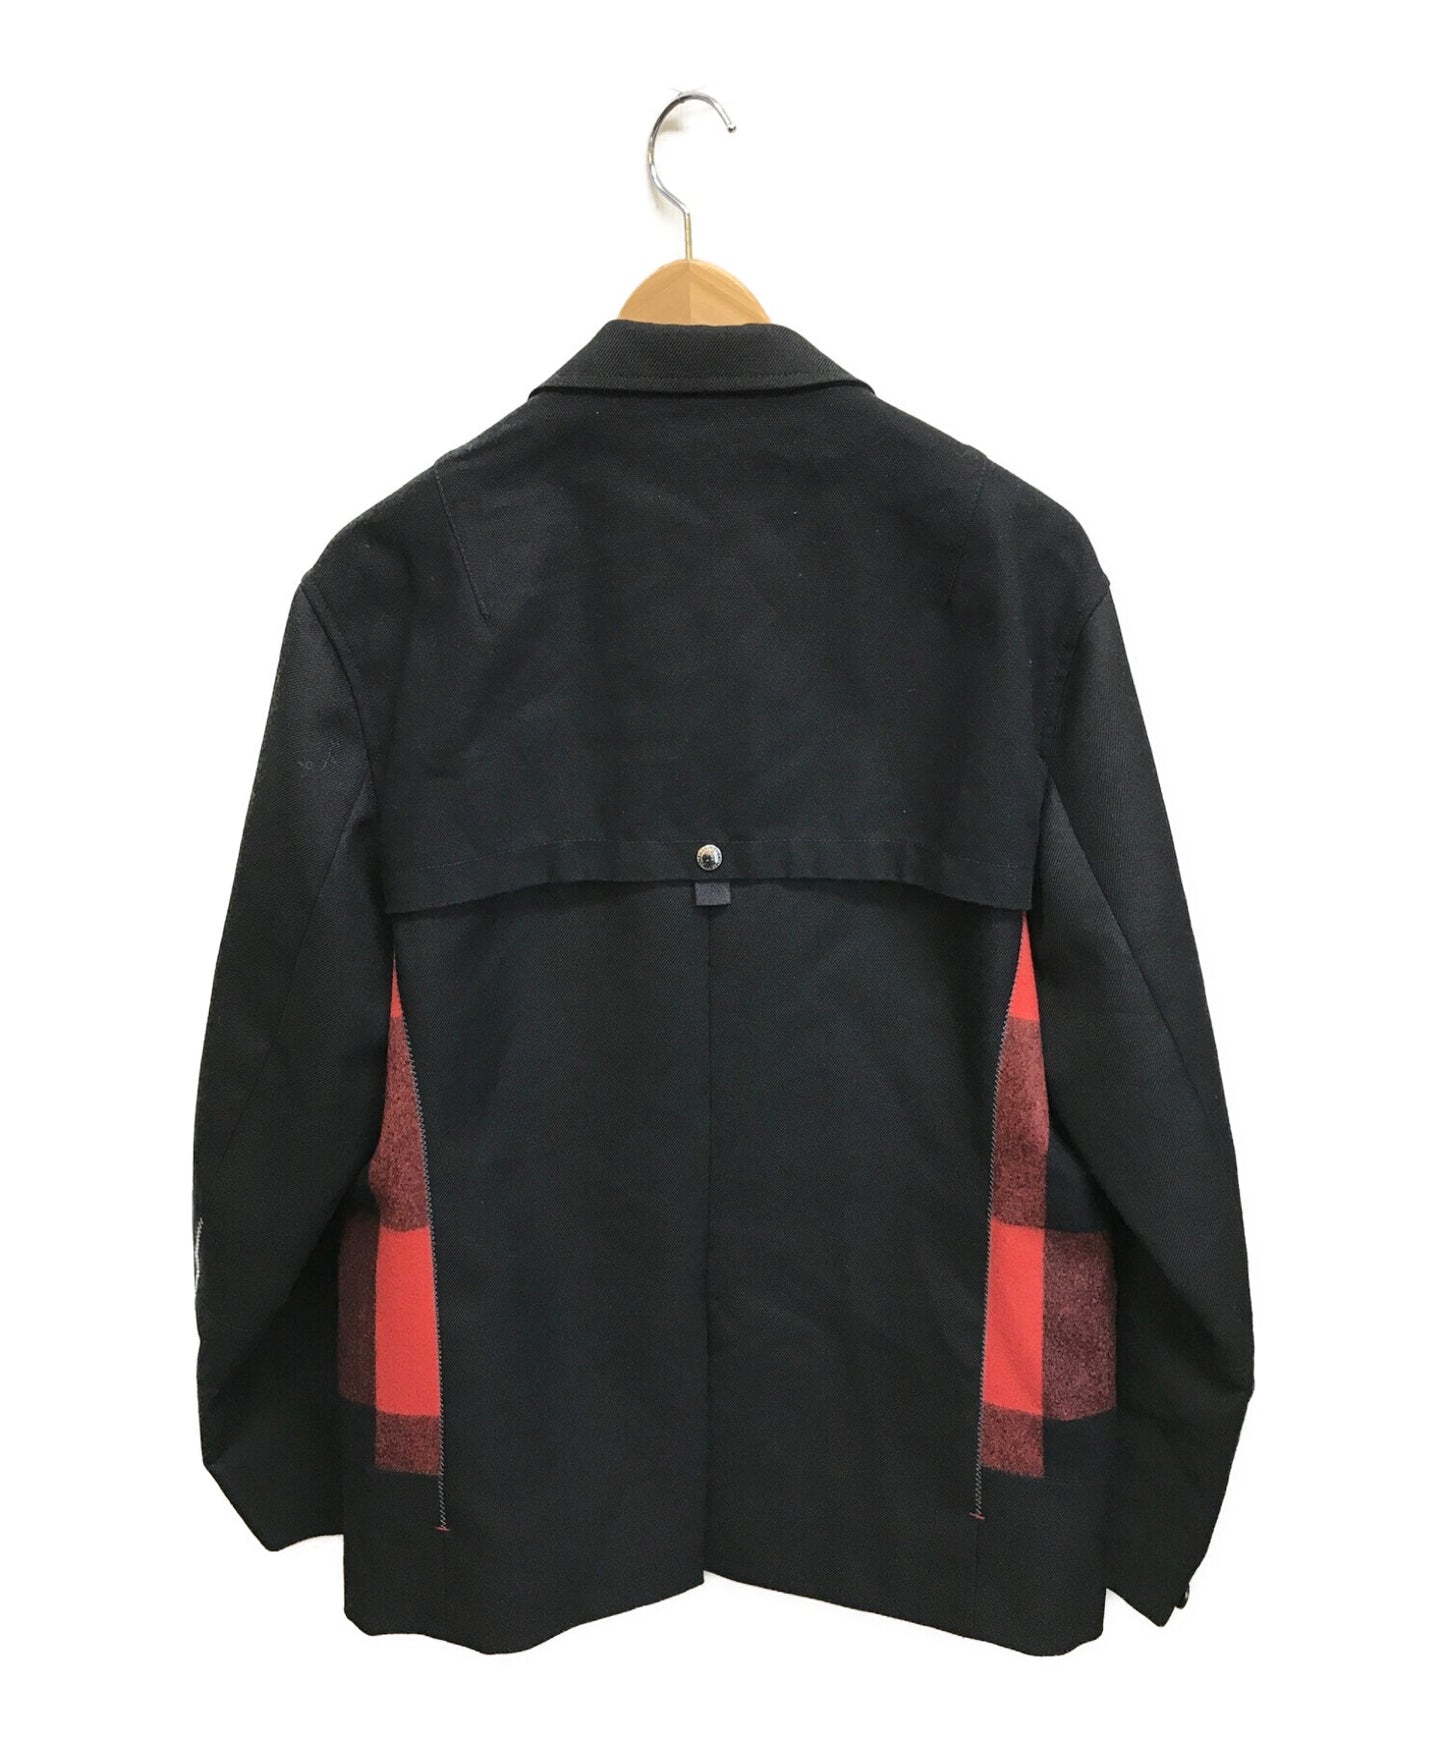 [Pre-owned] COMME des GARCONS JUNYA WATANABE MAN Wool Surge Duck-Switched Check Jacket AD2021 WH-J006